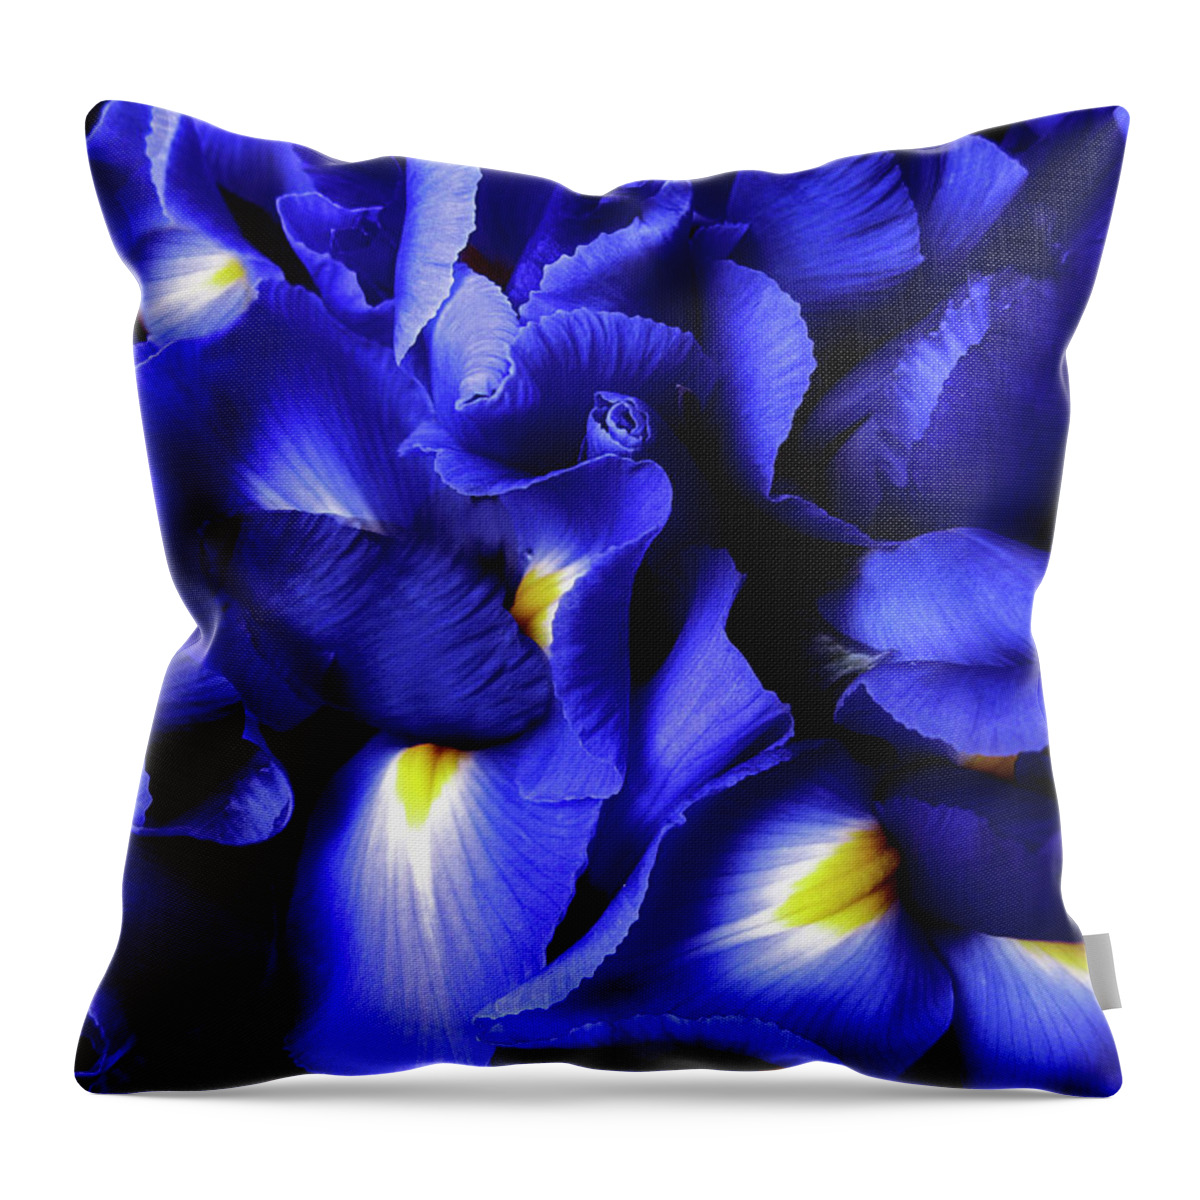  Iris Throw Pillow featuring the photograph Iris Abstract by Jessica Jenney